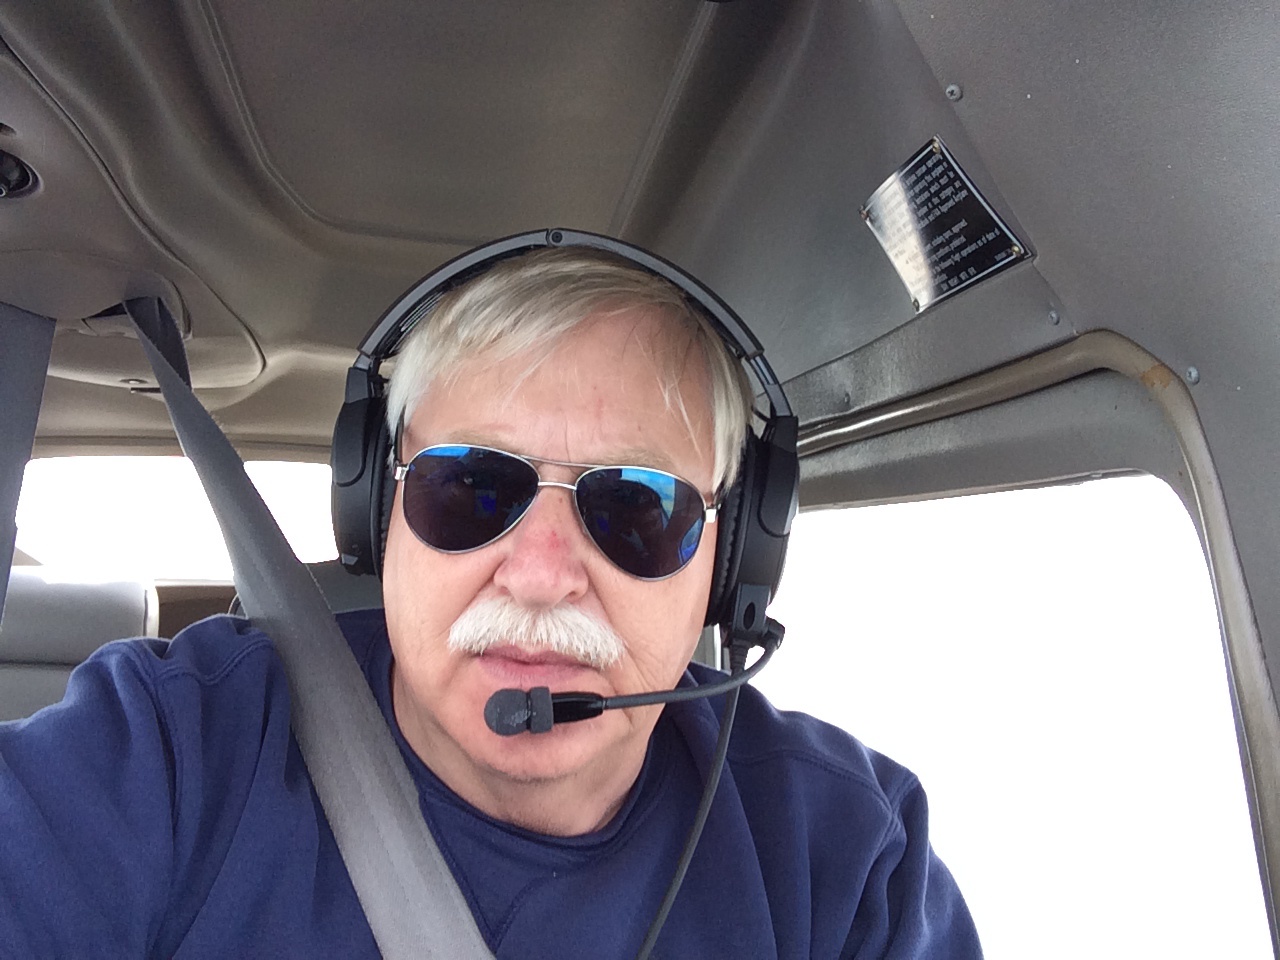 Michigan Department of Natural Resources pilot Neil Harri in the cockpit of his plane.